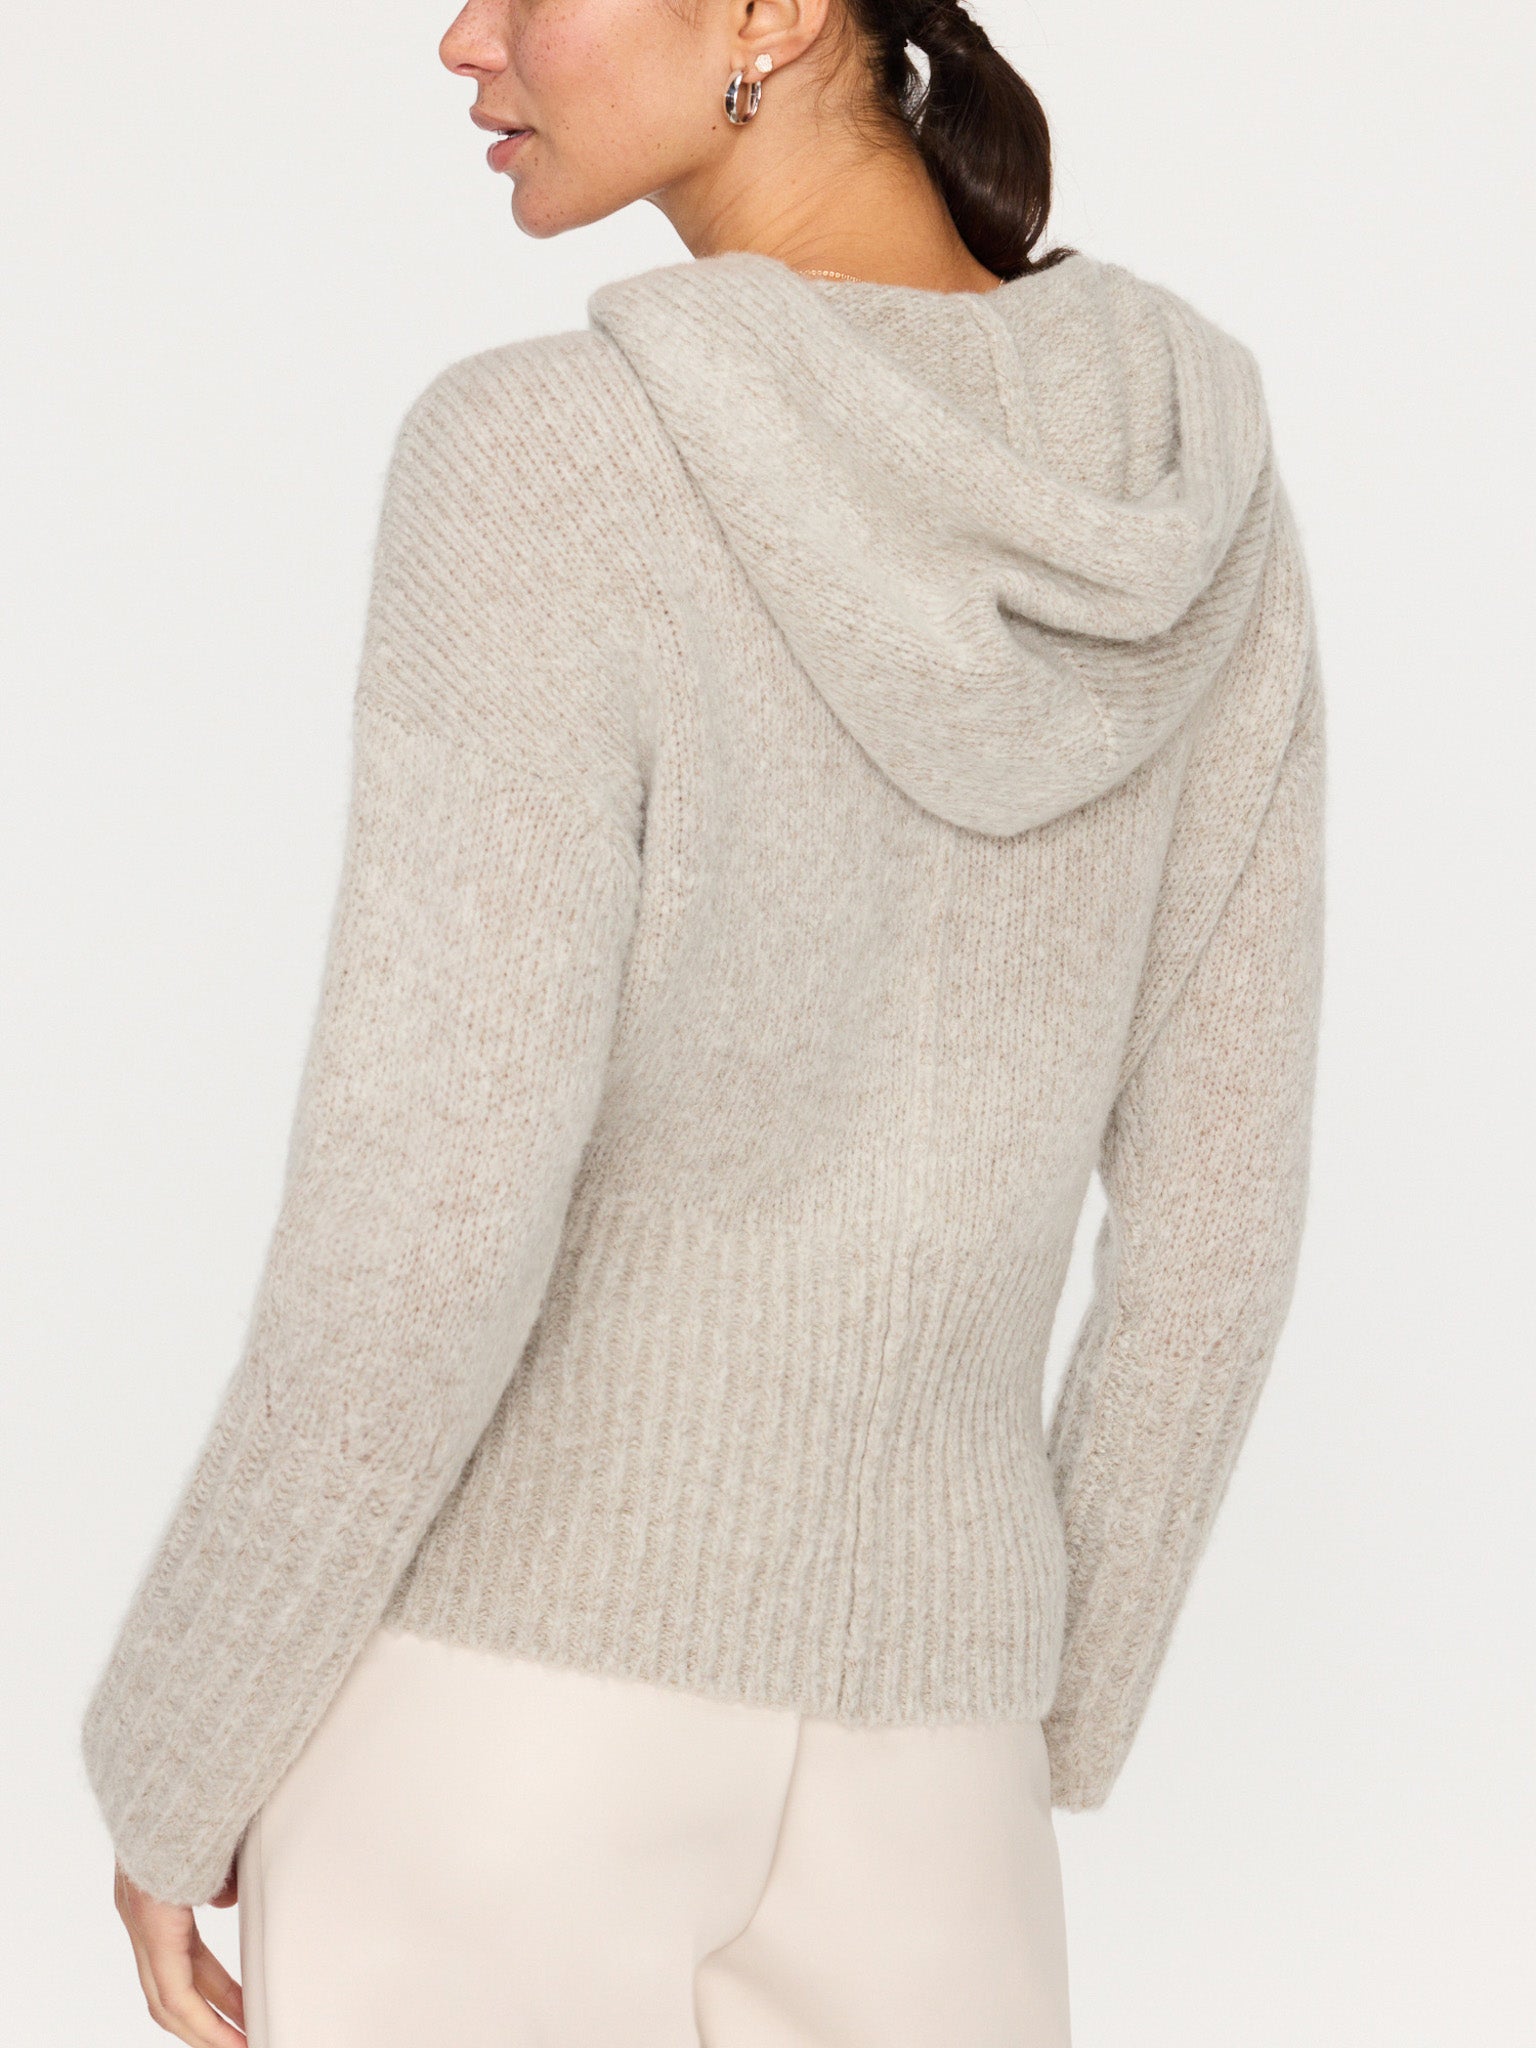 Camille light gray cashmere-wool hooded sweater back view